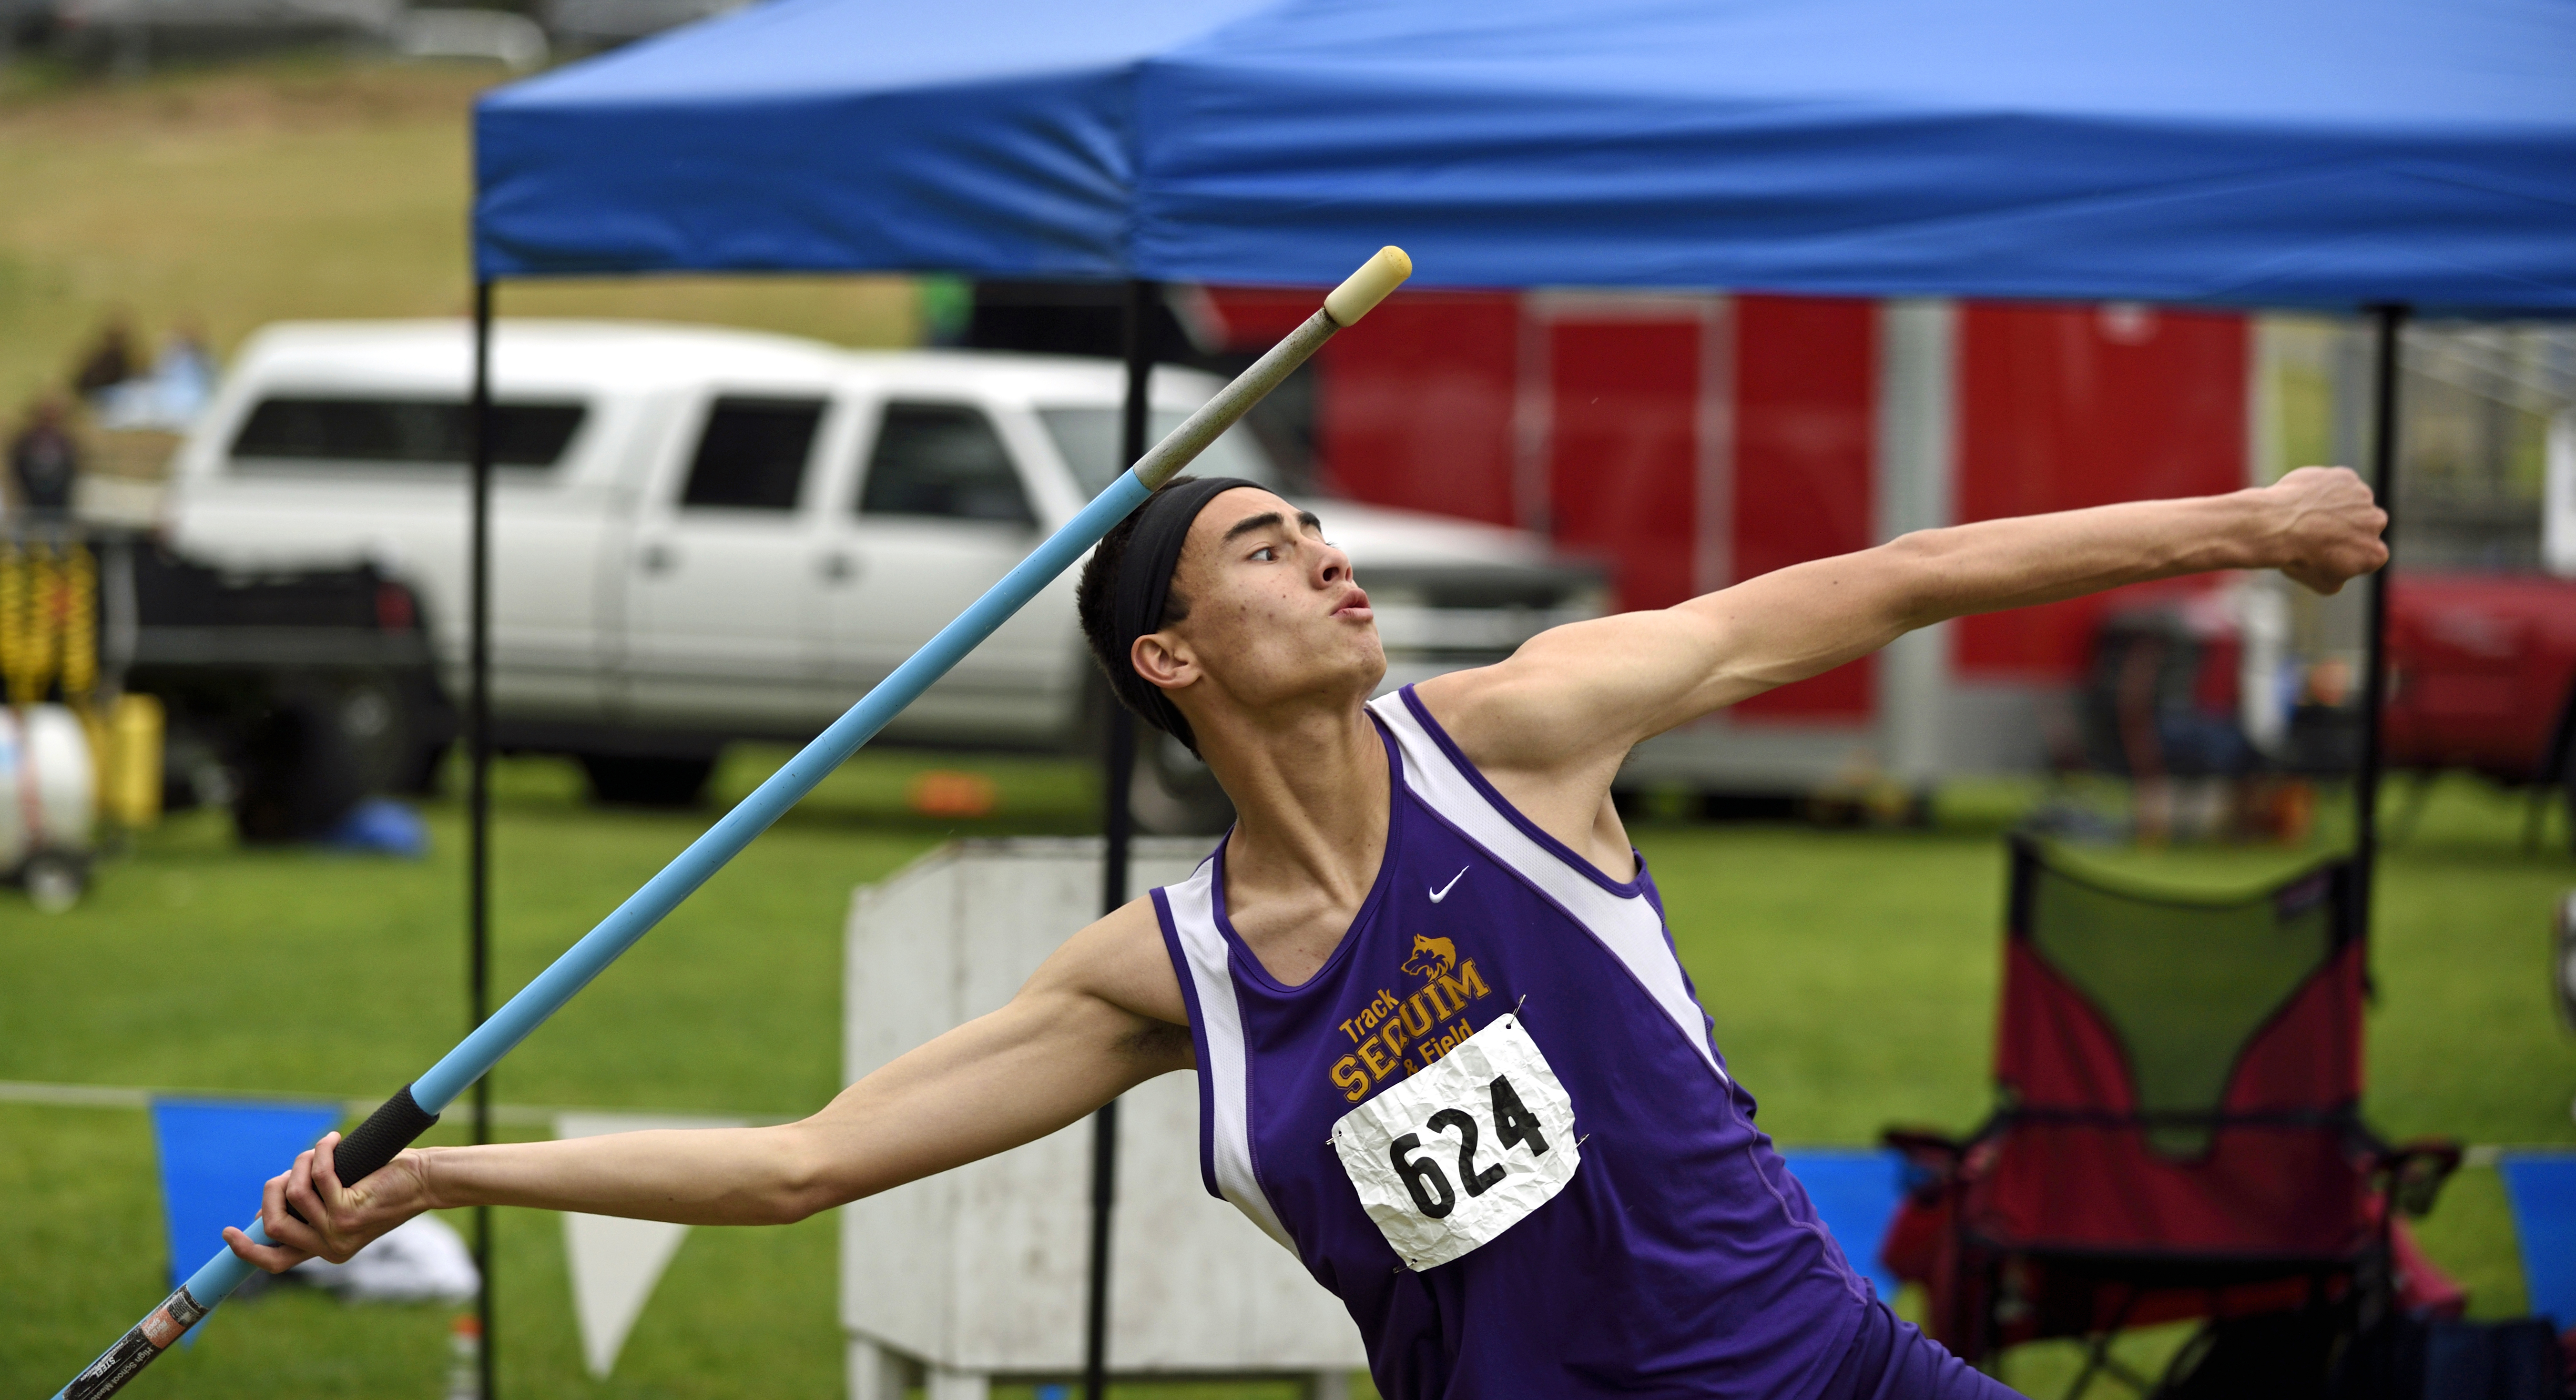 Alex Barry won an individual state championship in the javelin and ran the third leg of Sequim's first-ever relay state championship. Dave Shreffler/for Peninsula Daily News